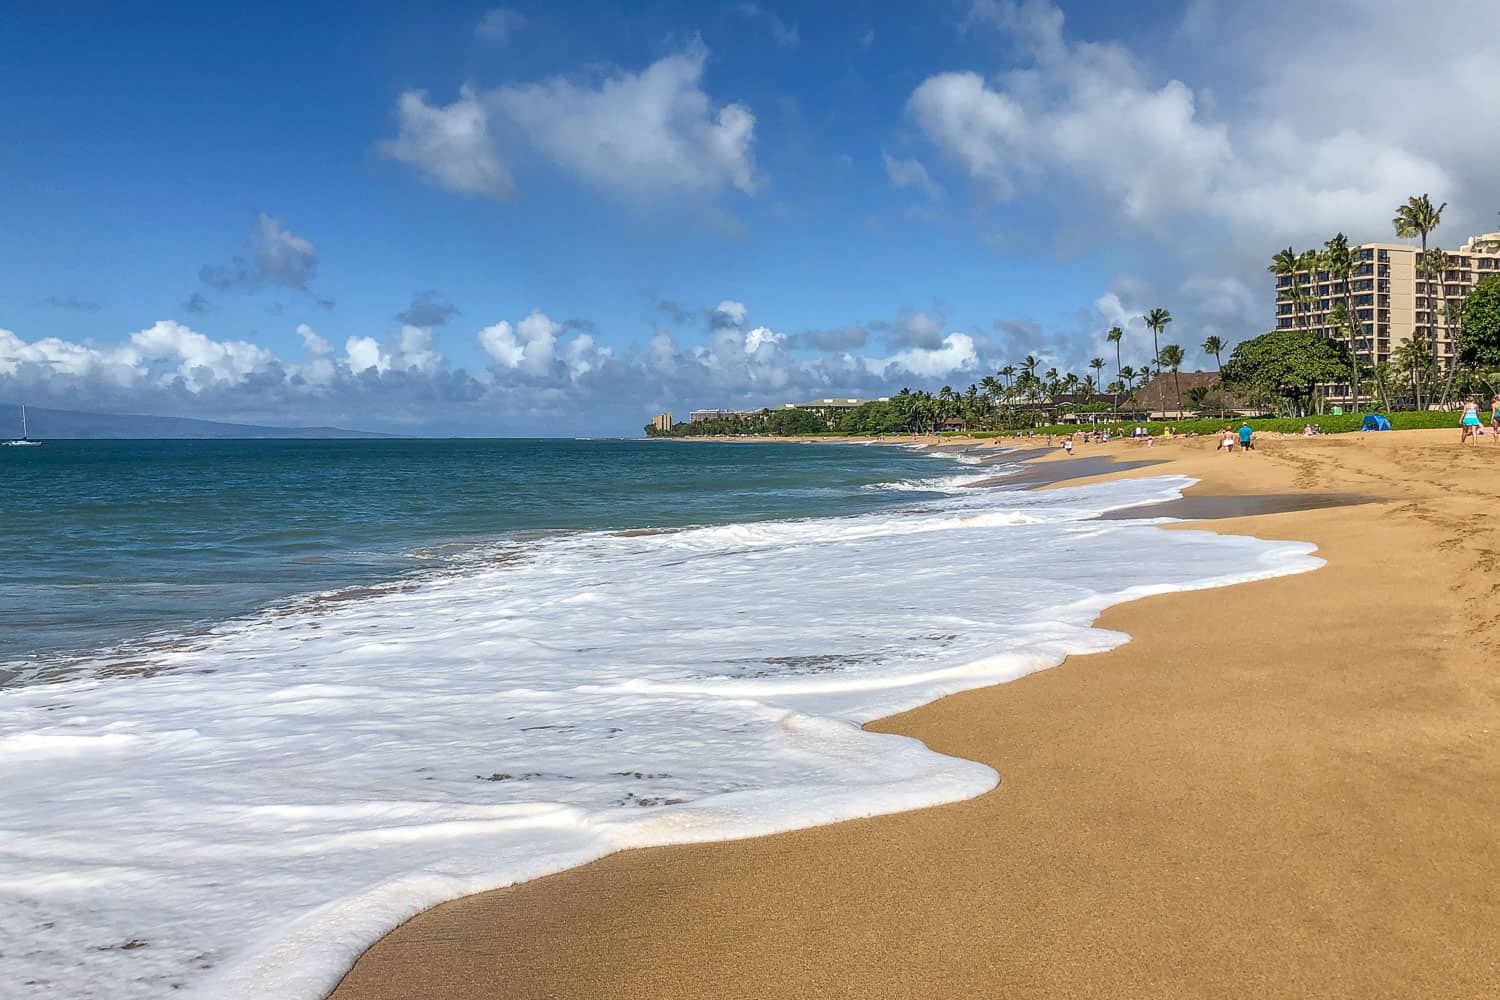 Airport Beach is one of the best things to do in Maui Hawaii